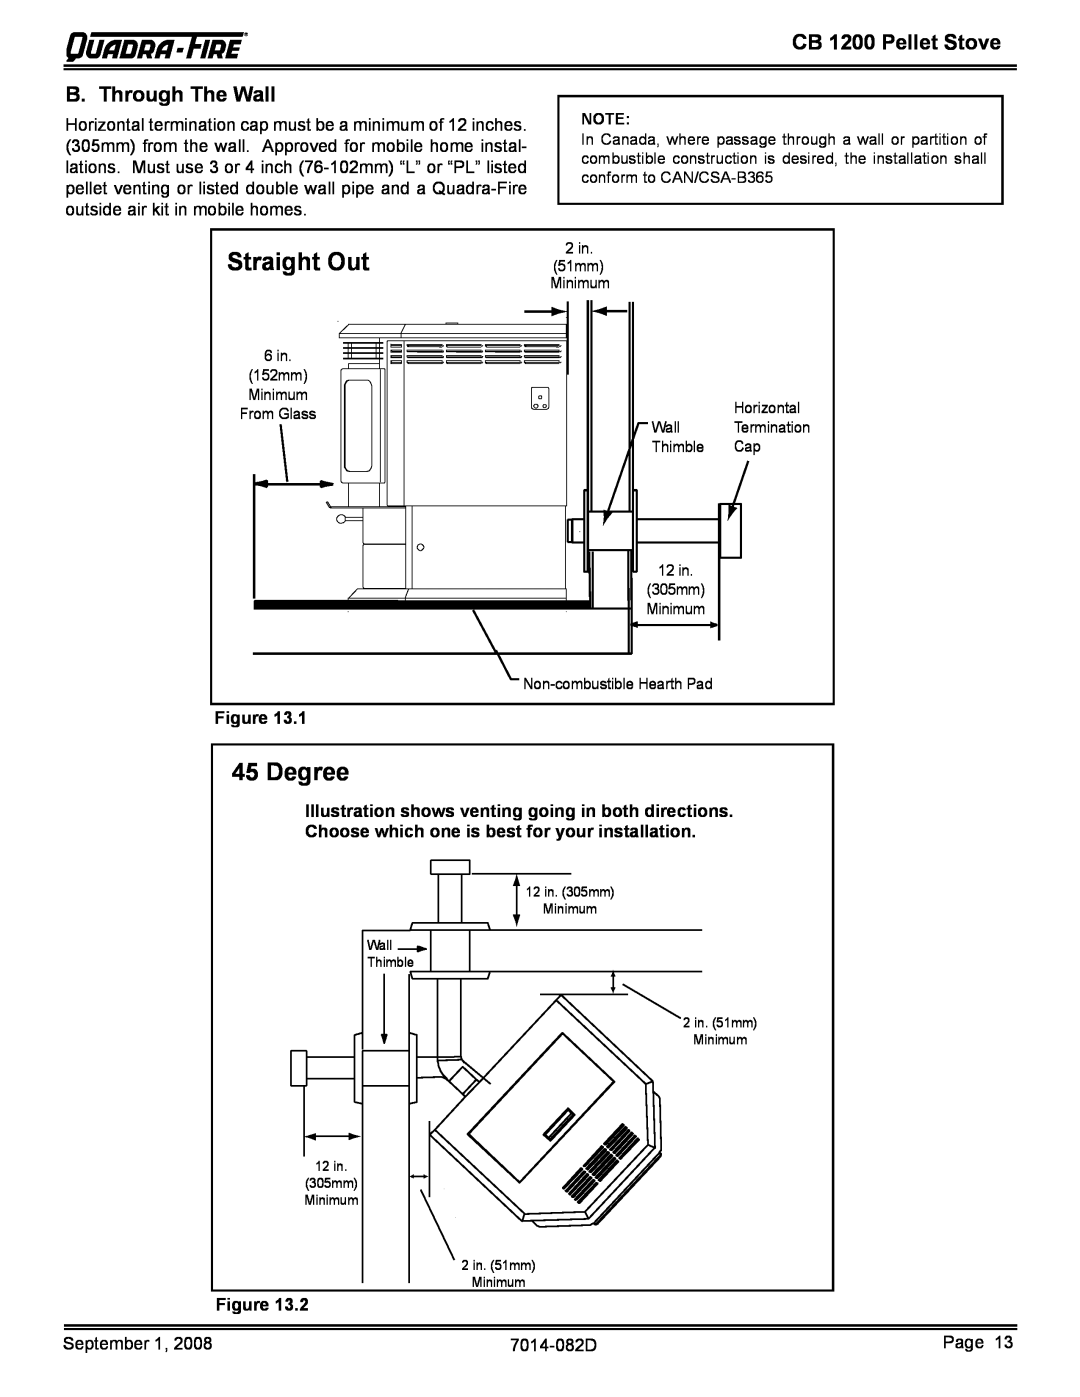 Quadra-Fire CB1200-B owner manual Straight Out, Degree, B. Through The Wall, CB 1200 Pellet Stove 